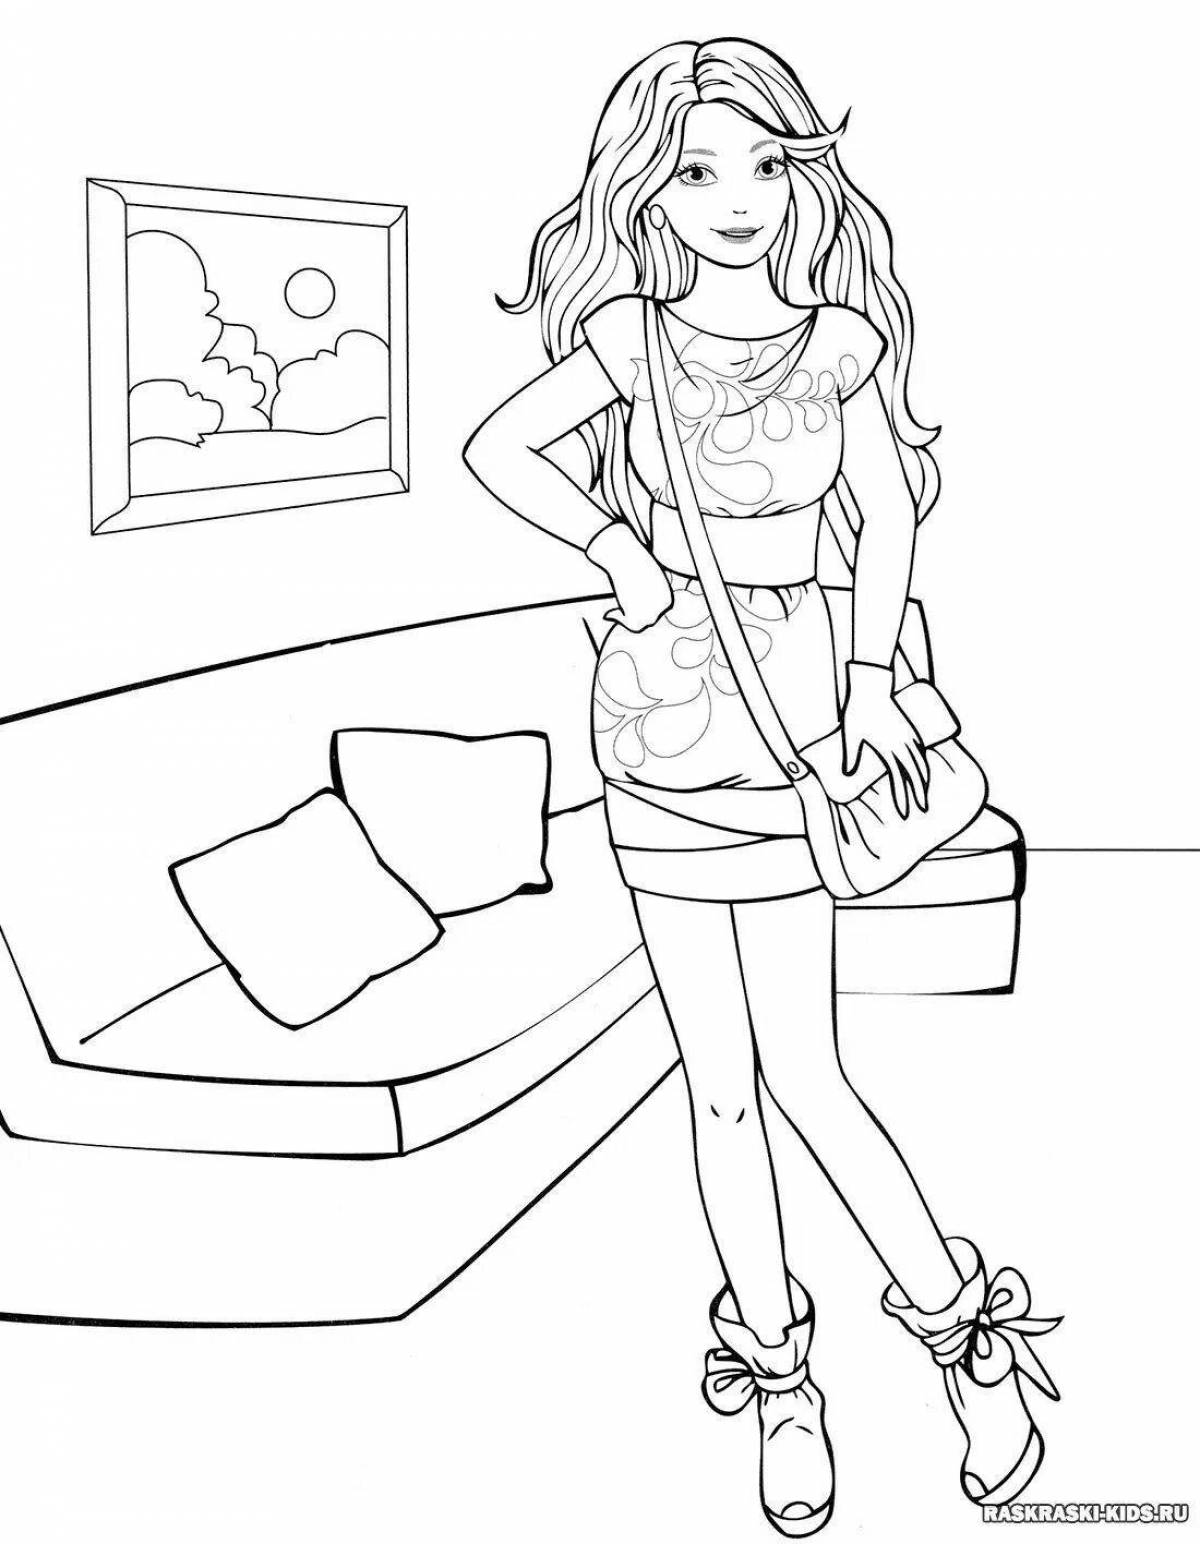 Charming coloring book for girls, trendy, beautiful